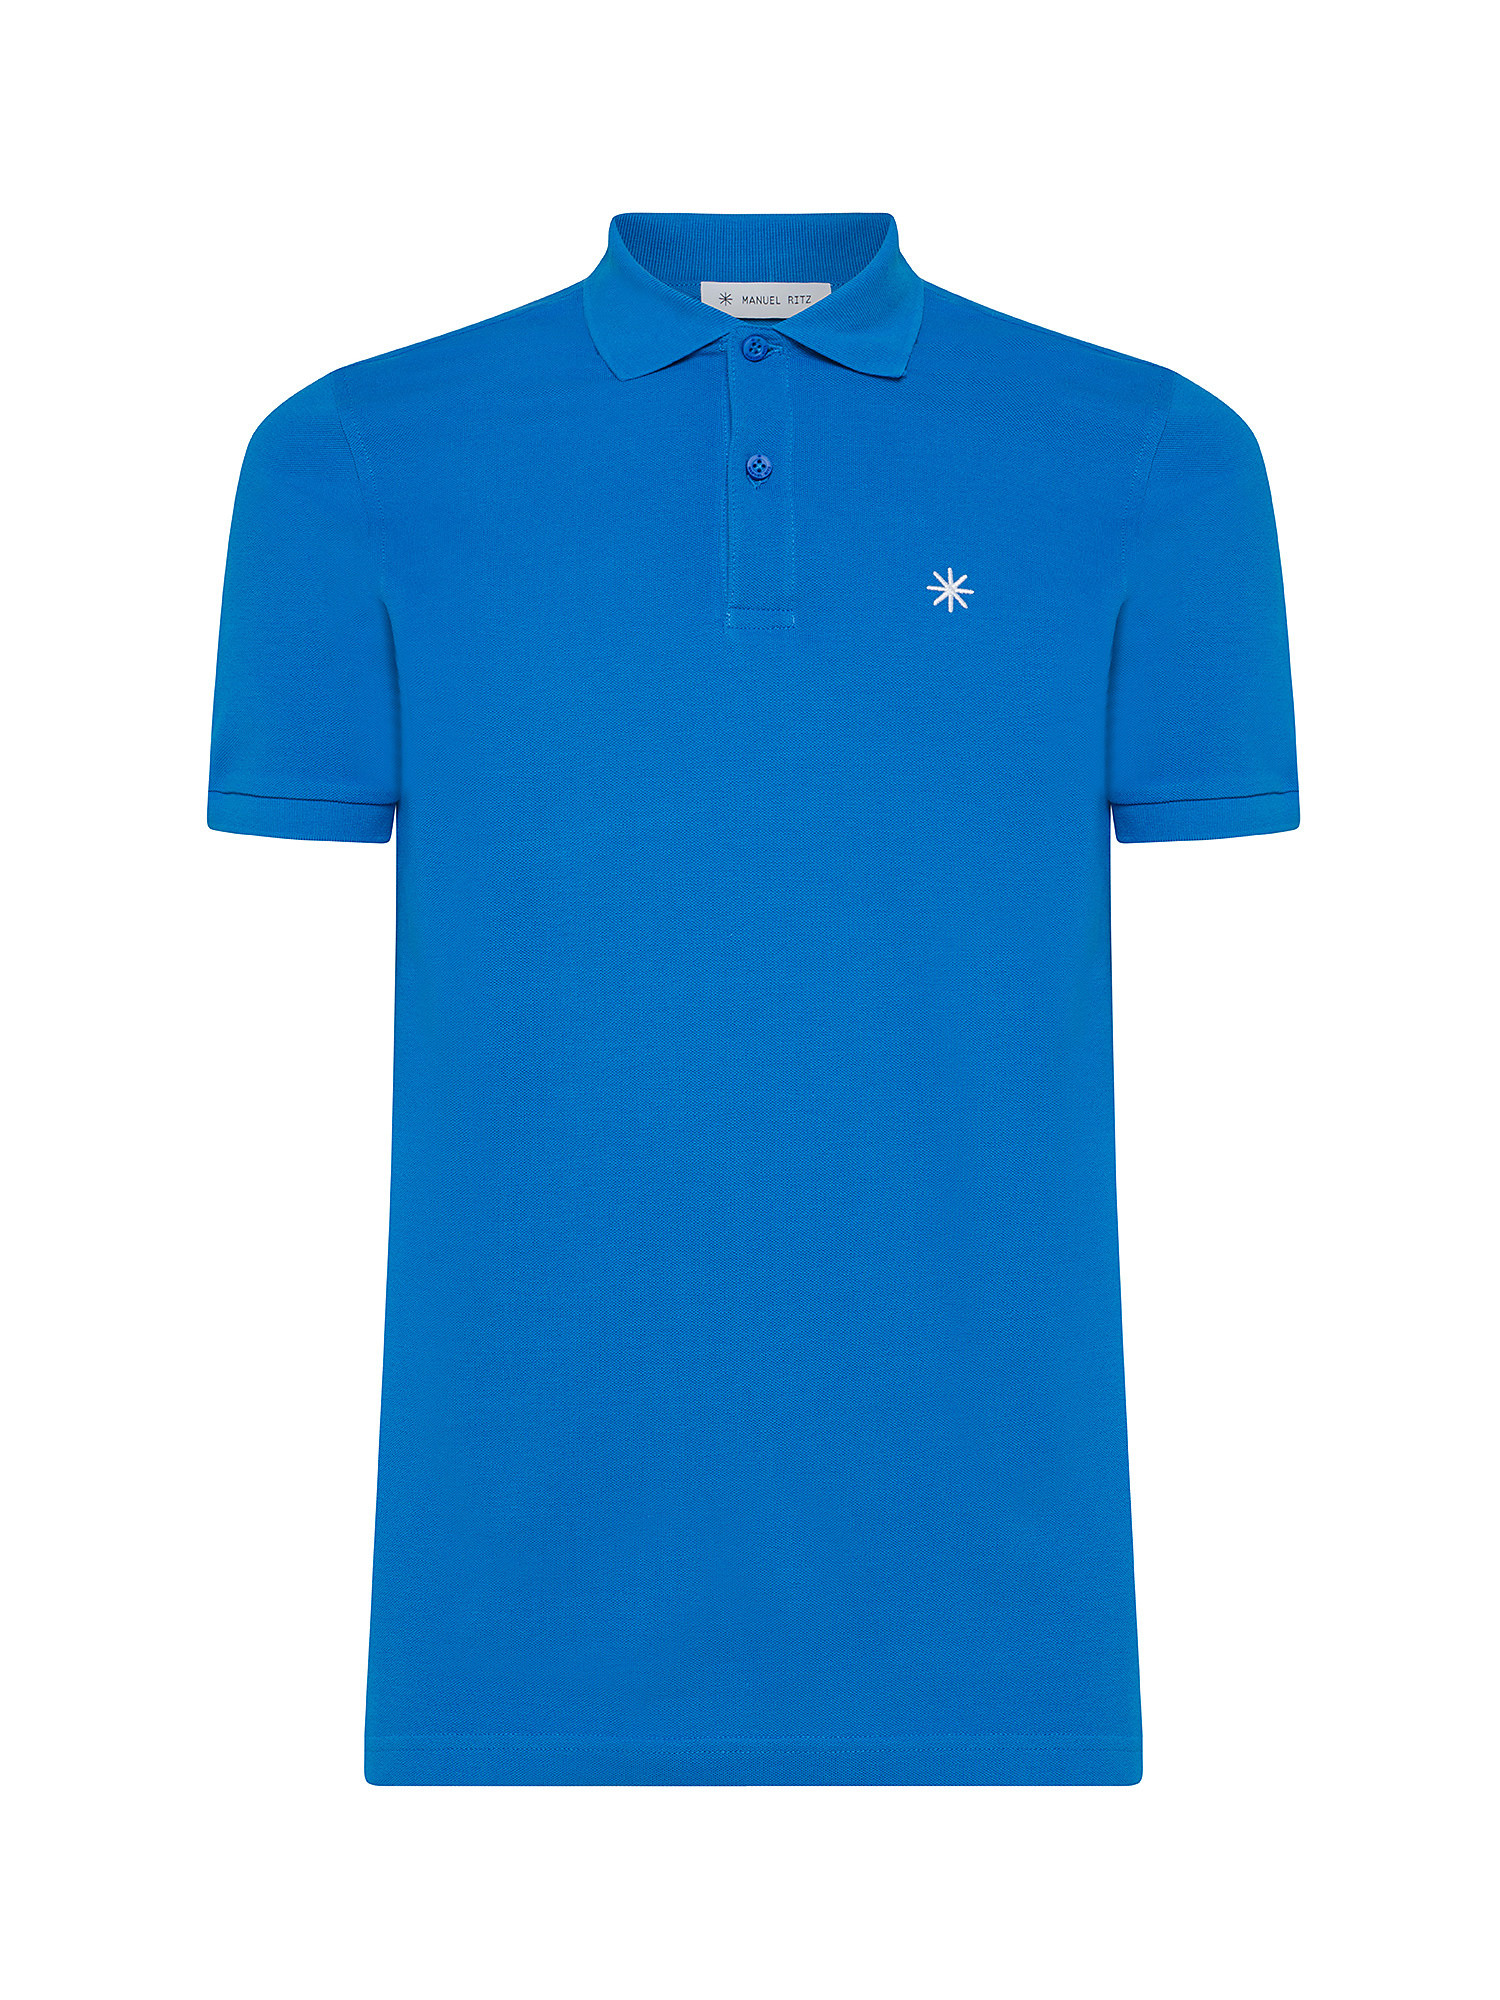 Manuel Ritz - Polo with contrasting embroidered logo, Royal Blue, large image number 0